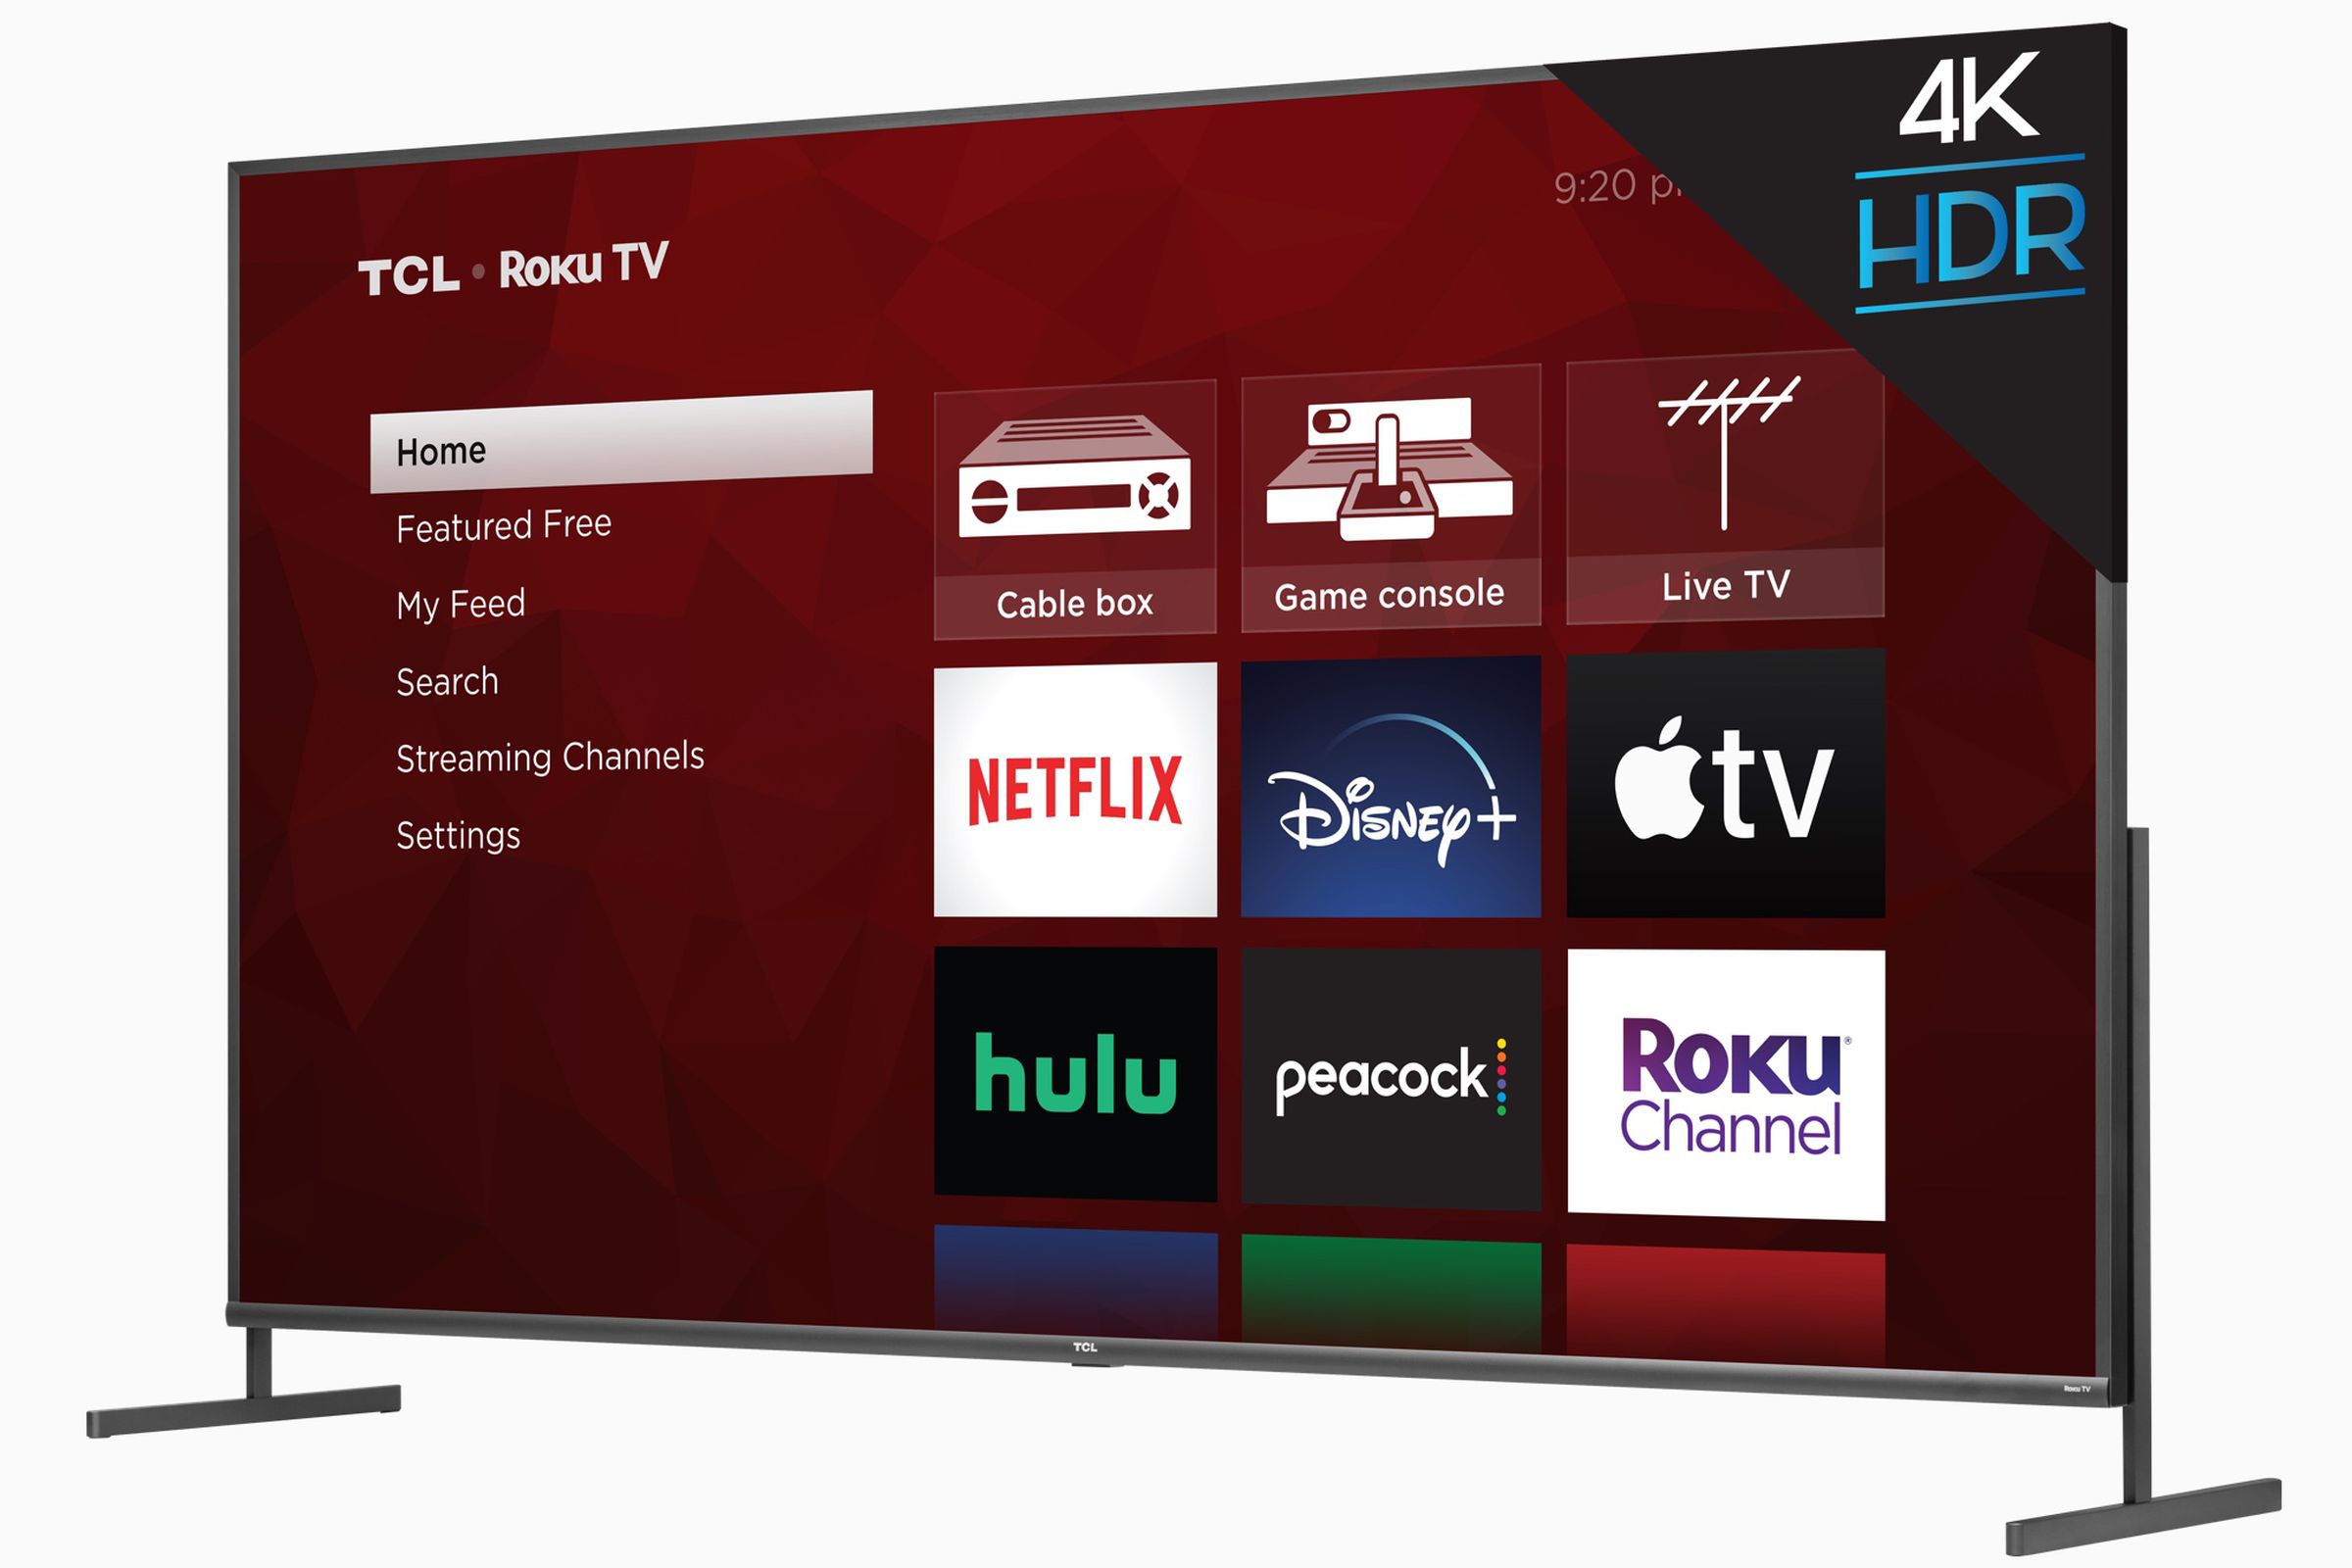 TCL’s XL Collection is a line of 85-inch TVs that start as low as $1,599.